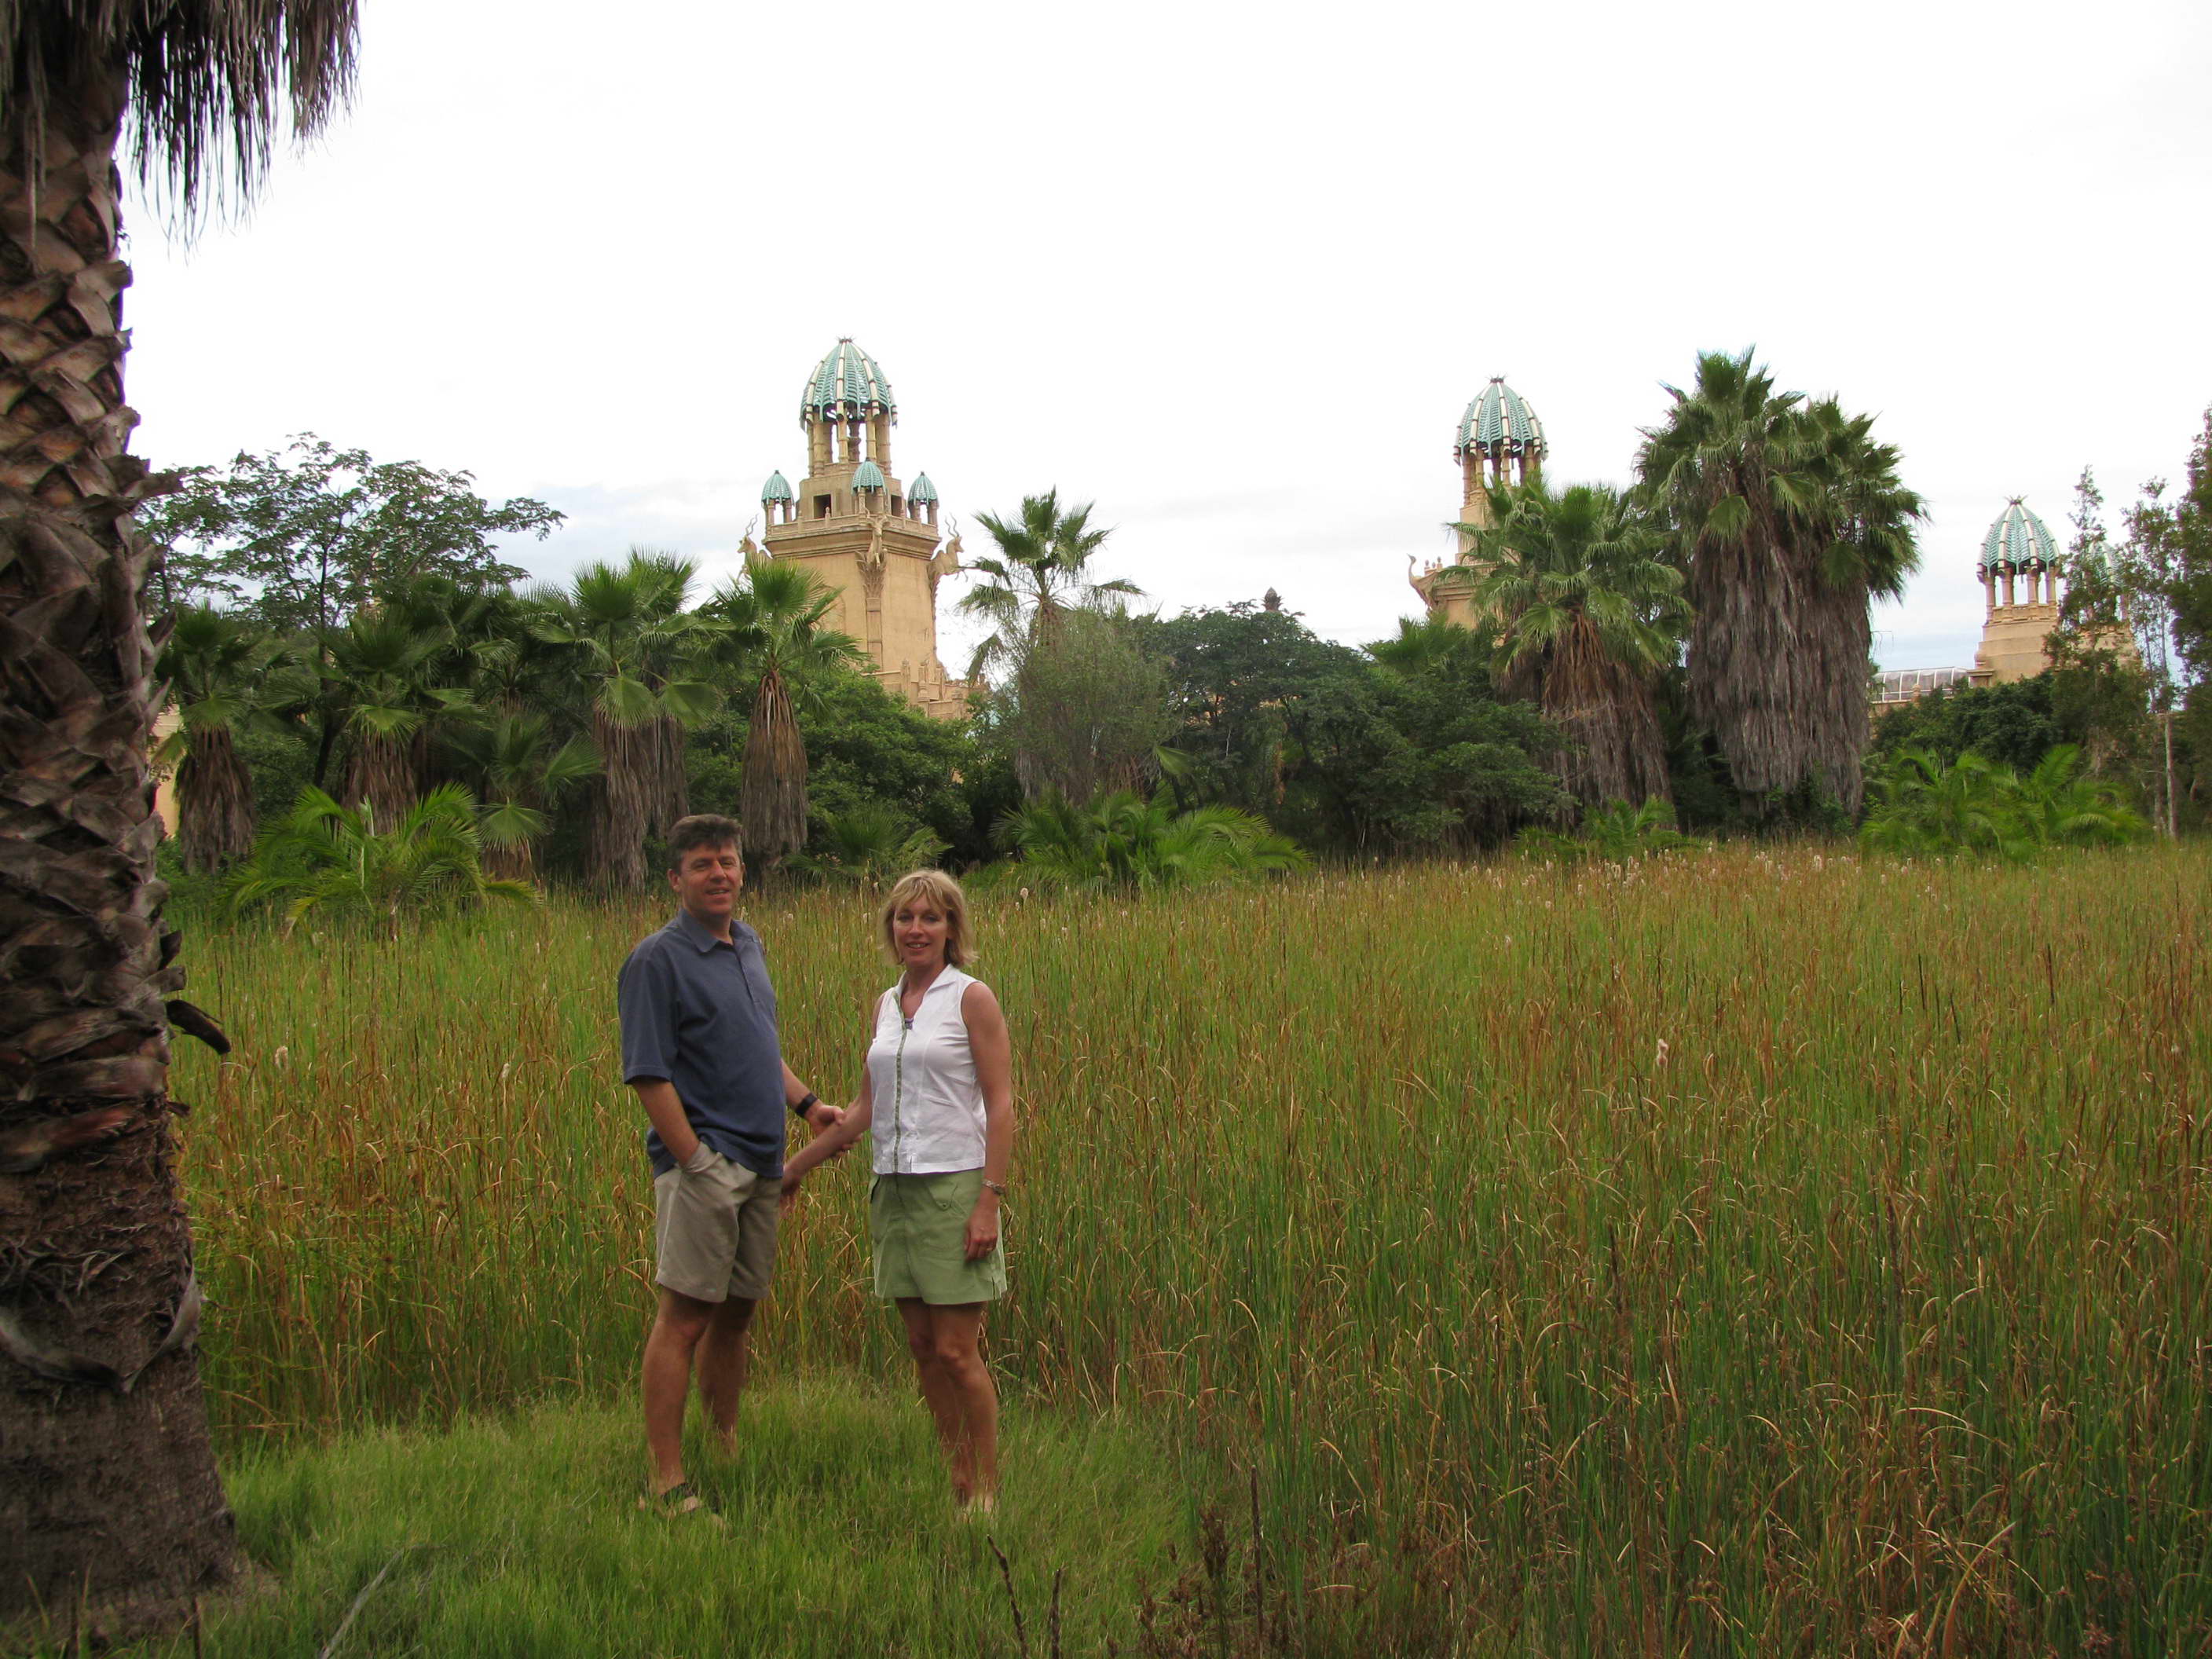 Debbie and I near the Lost City Hotel